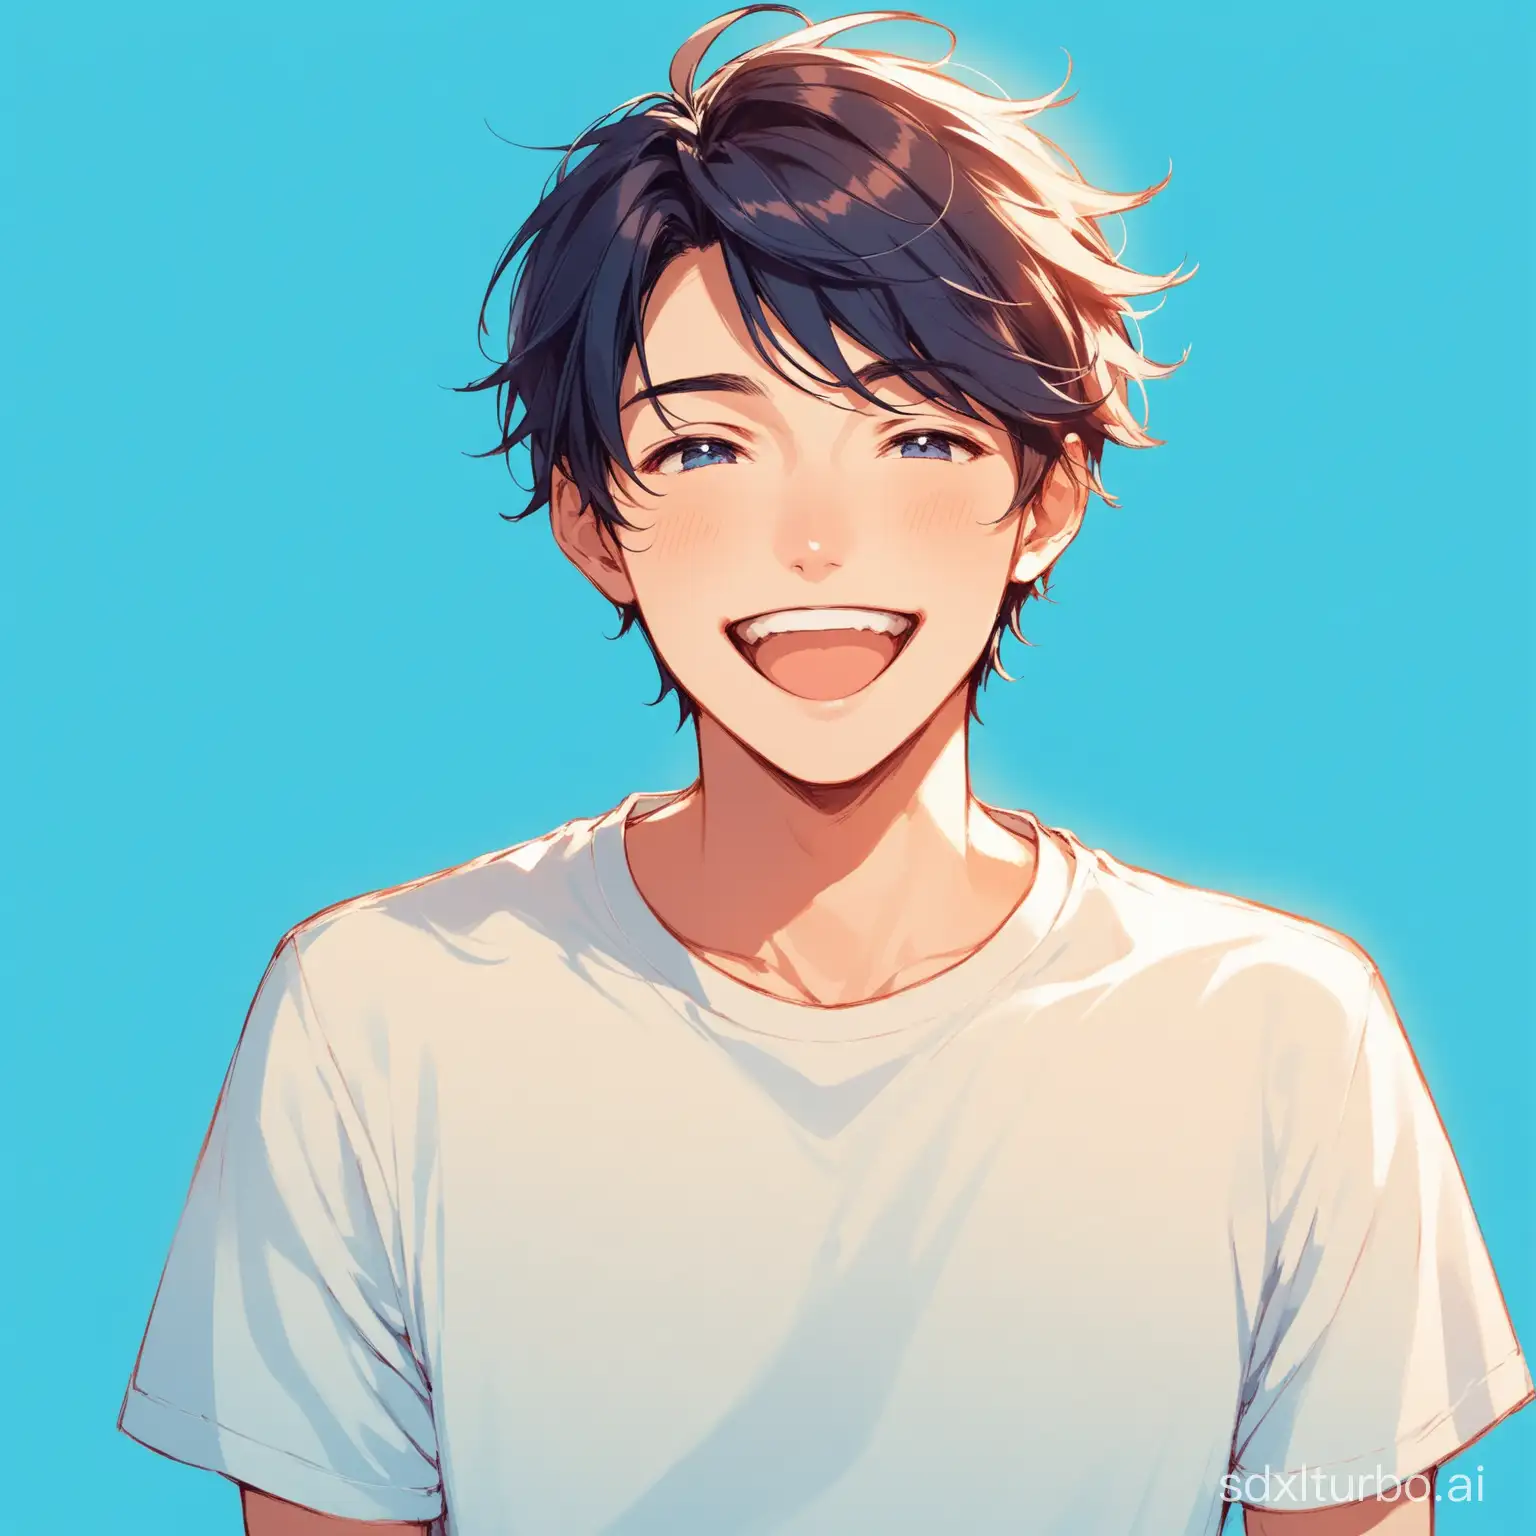 The happy young man with a blue background